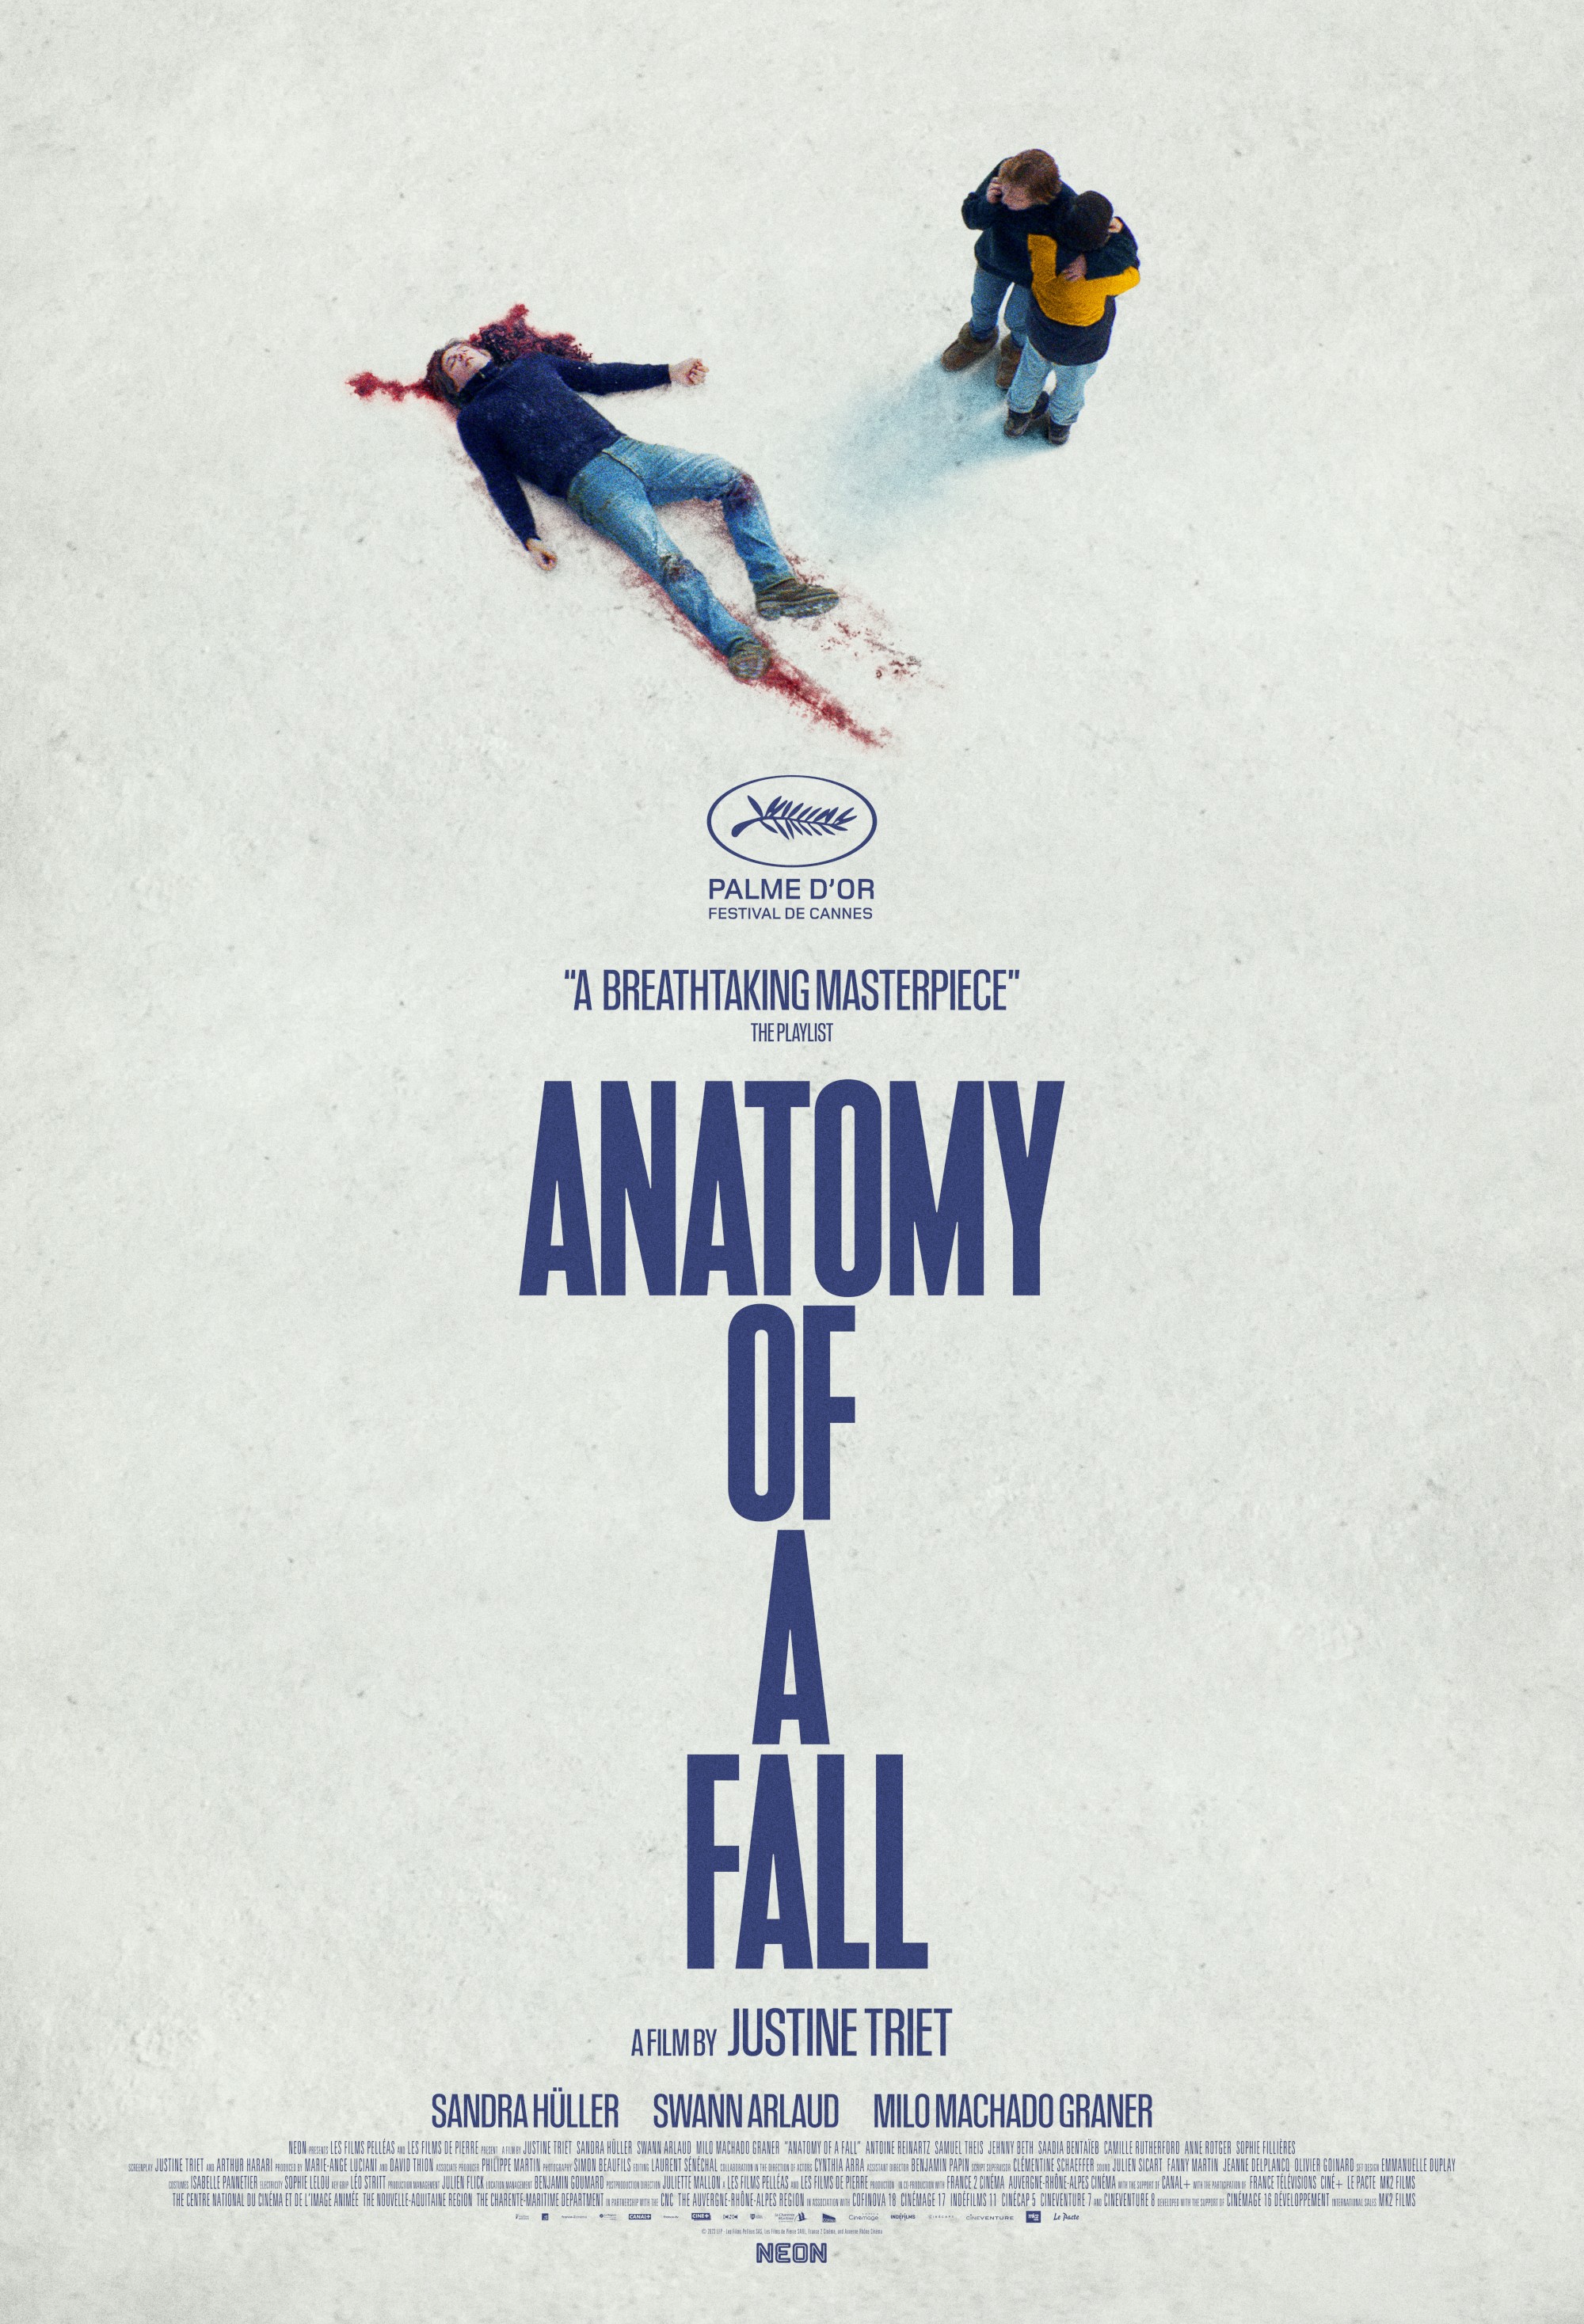 The Fall Guy - Rotten Tomatoes